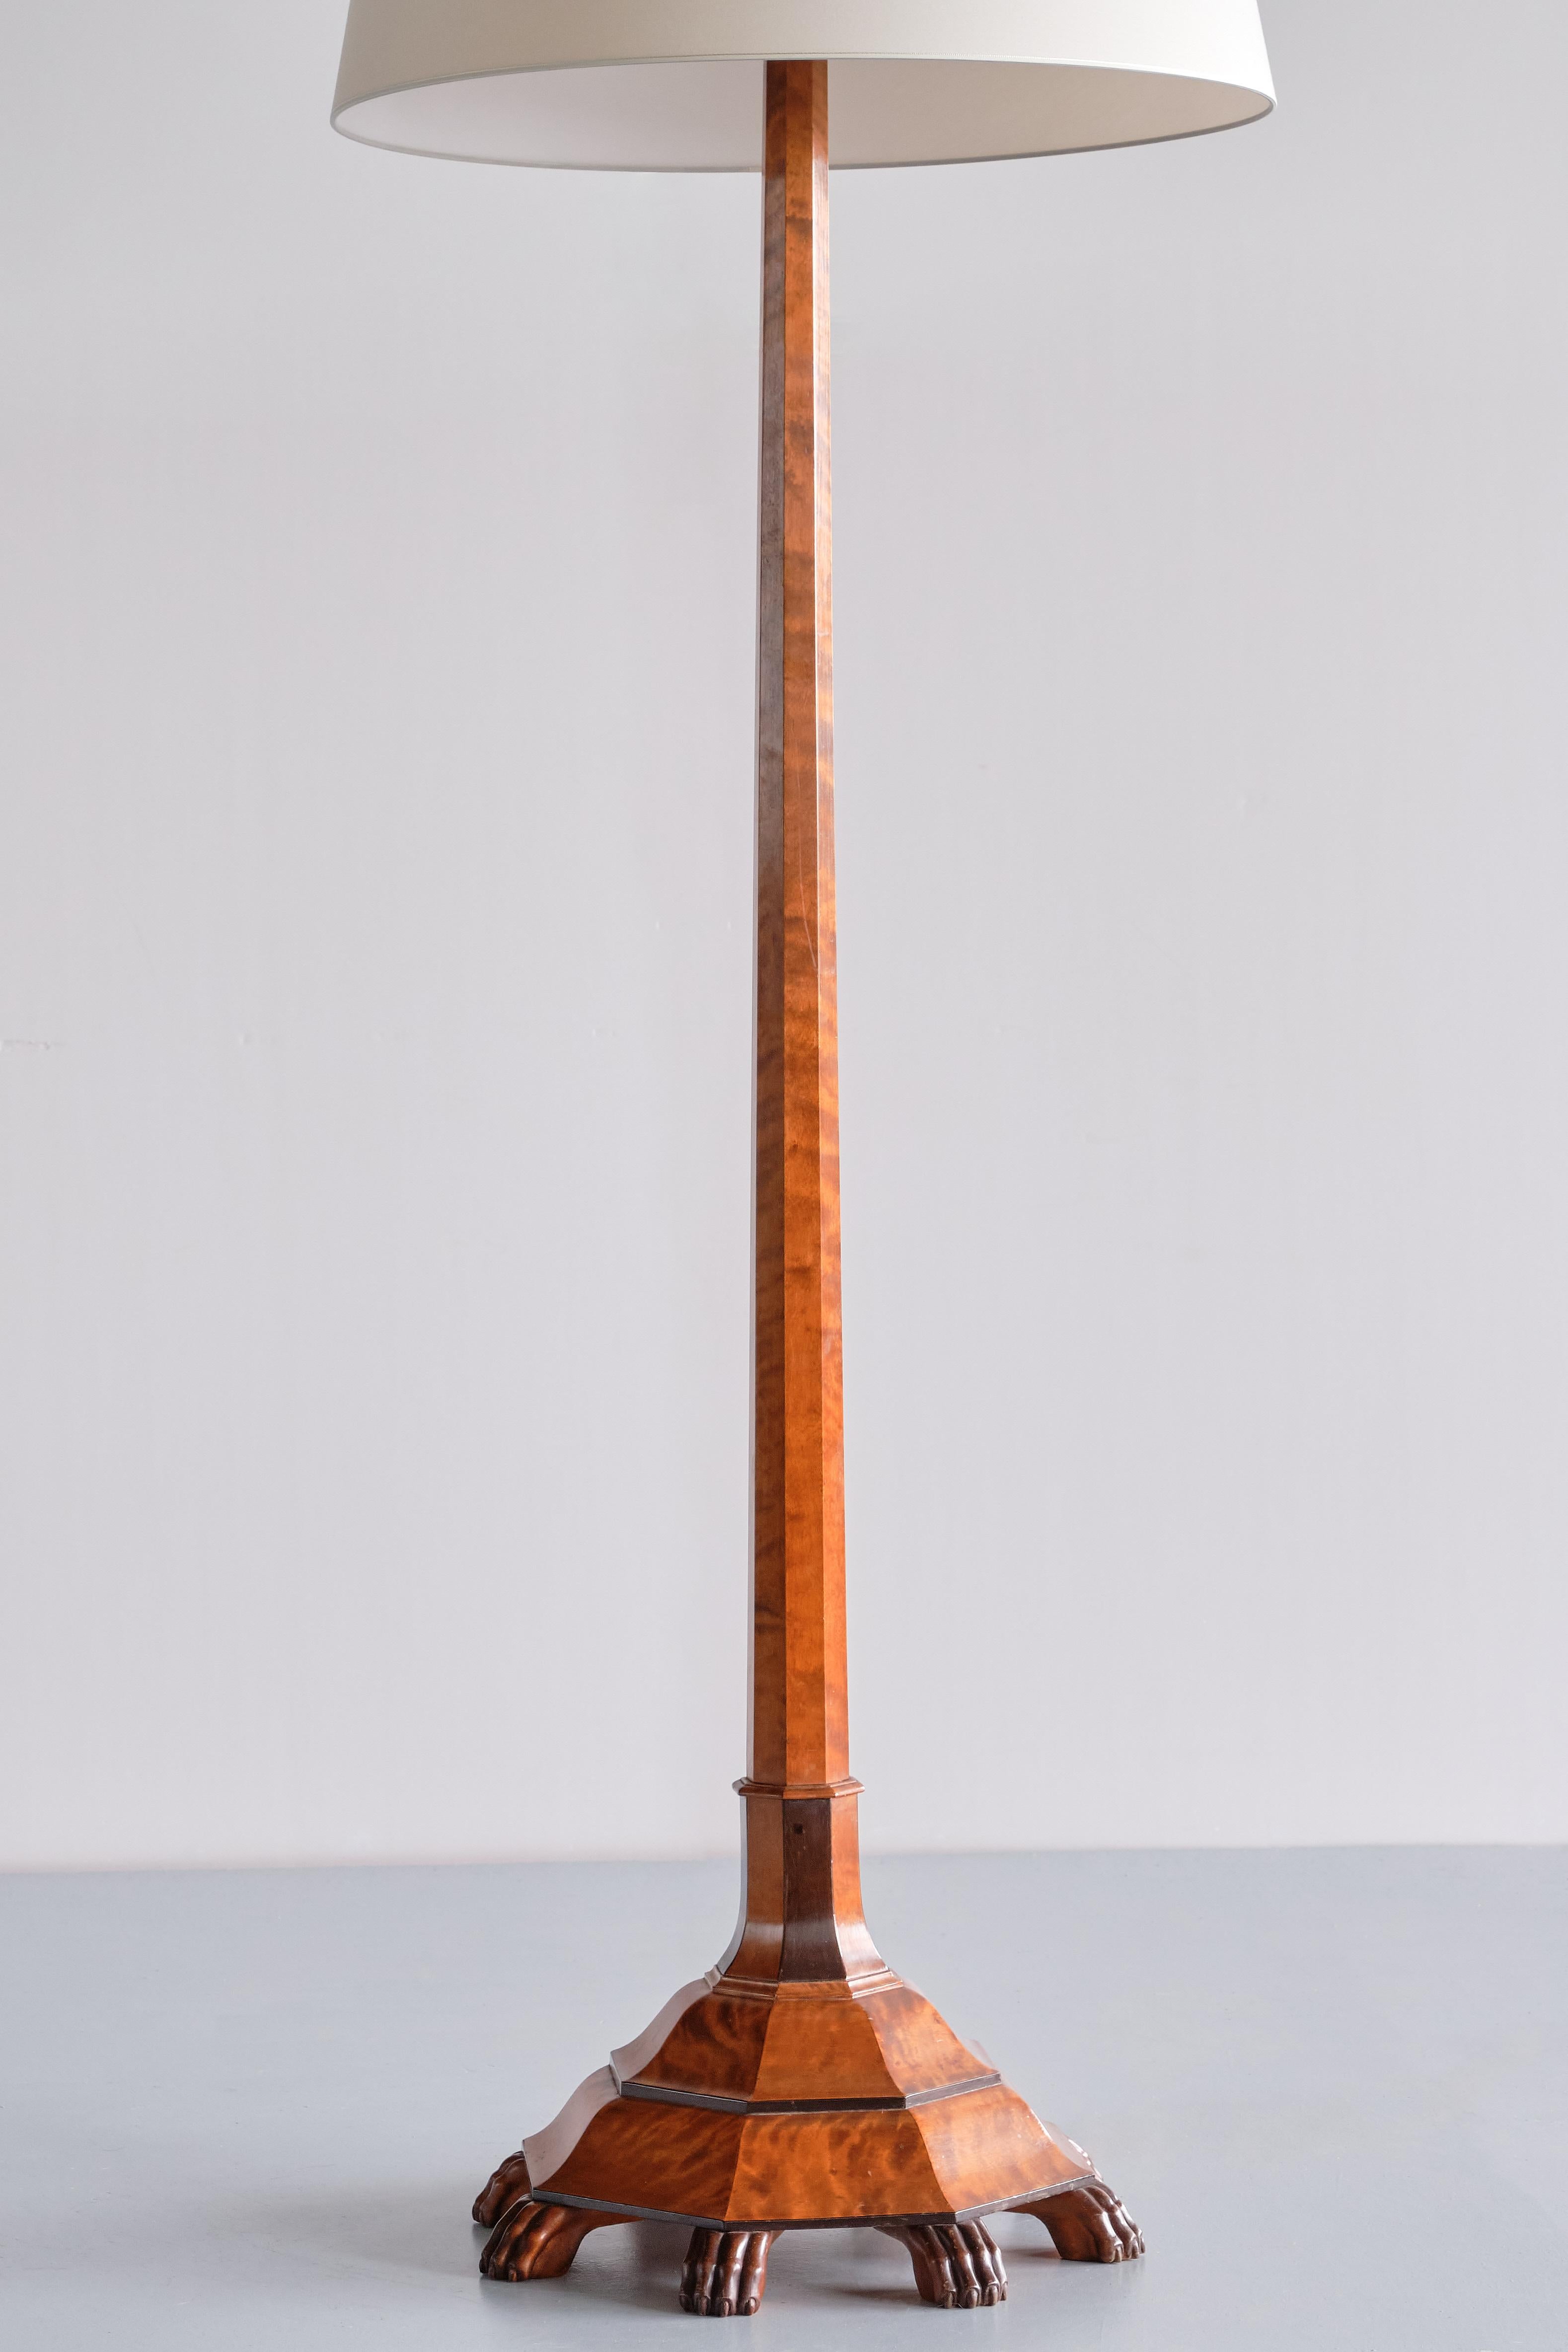 Early 20th Century Exceptional Swedish Grace Floor Lamp in Birch with Carved Paw Feet, 1920s For Sale